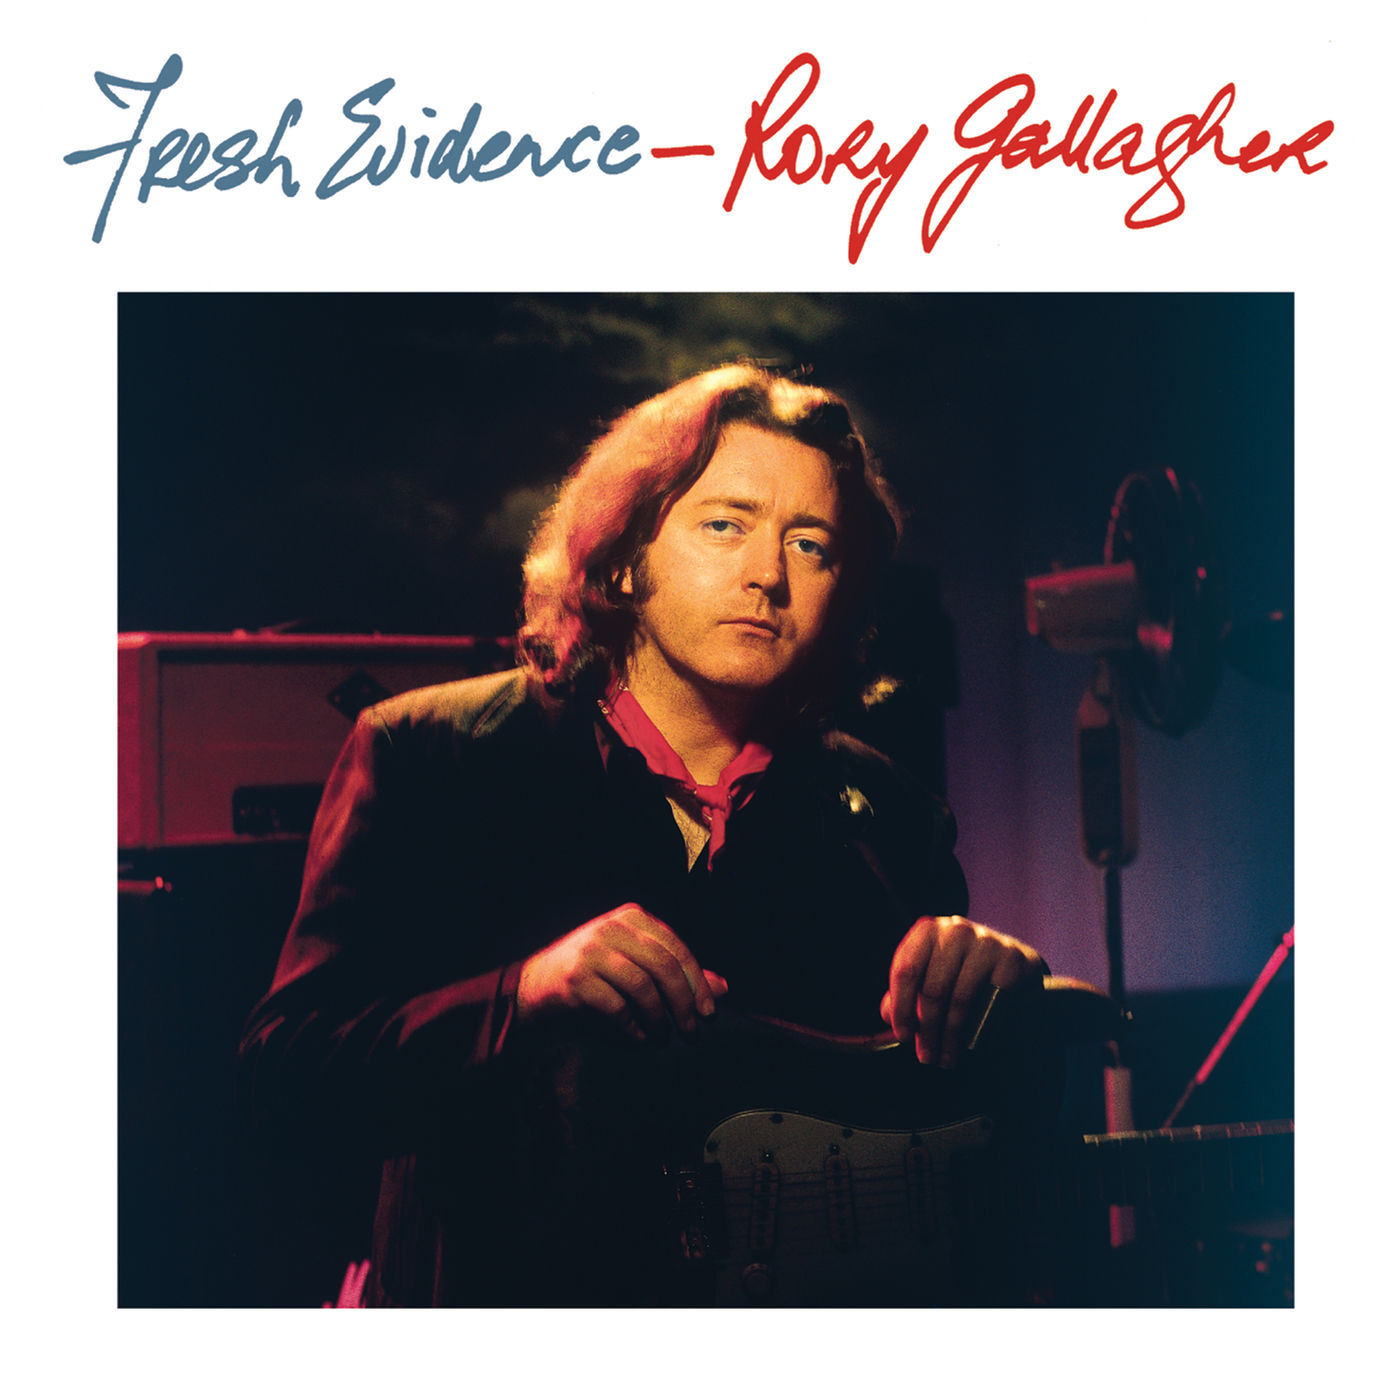 Rory Gallagher - Fresh Evidence (Remastered) (1990/2020) [FLAC 24bit/96kHz]